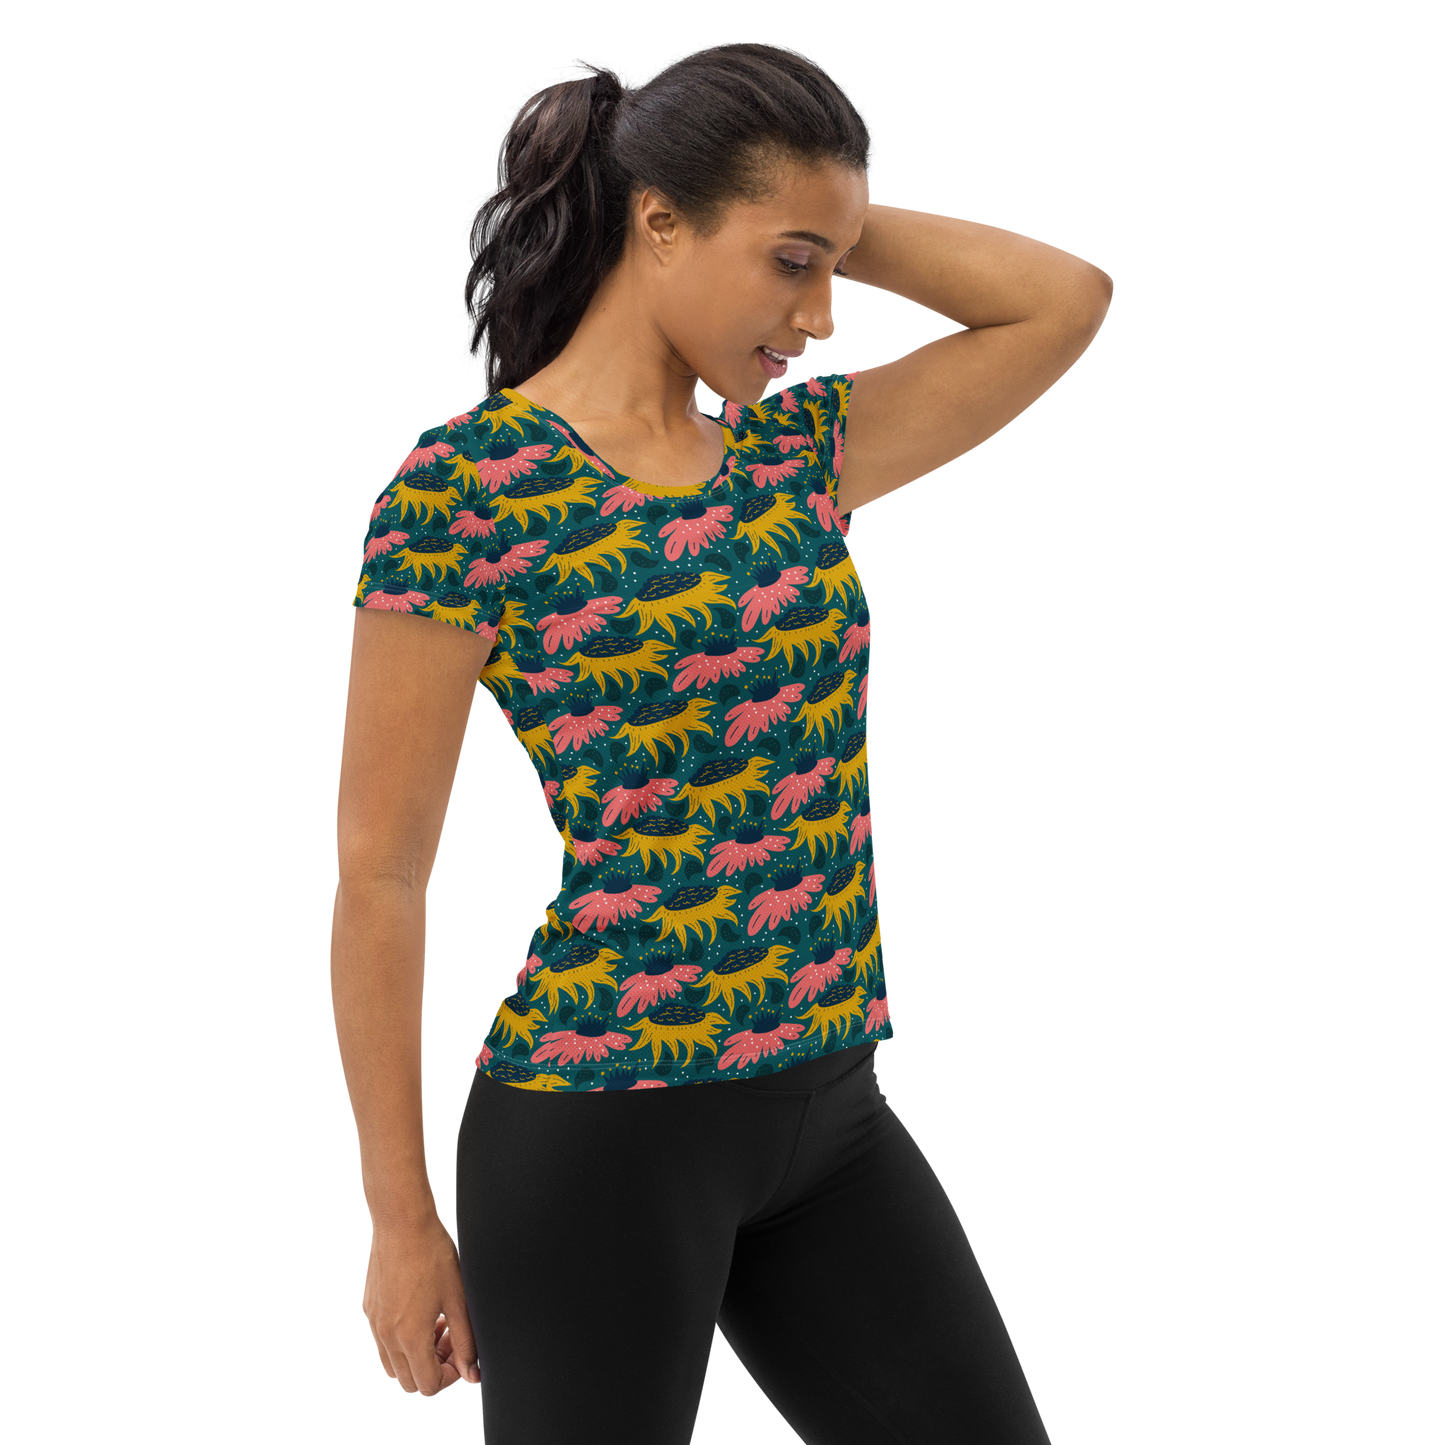 Scandinavian Spring Floral | Seamless Patterns | All-Over Print Women's Athletic T-Shirt - #8